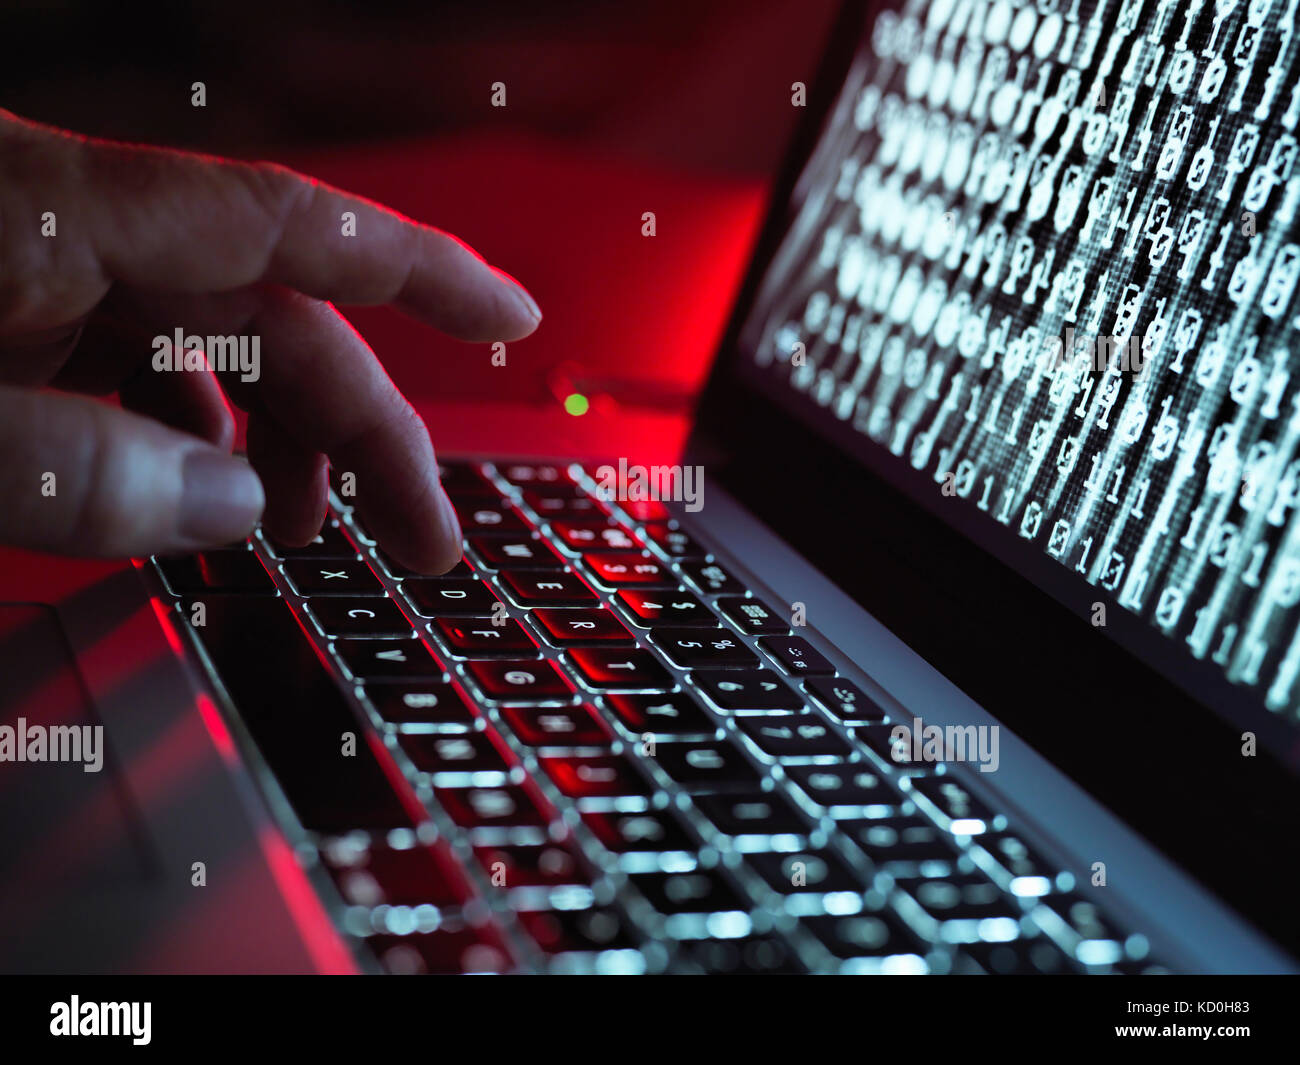 Laptop computer being infected by a virus Stock Photo